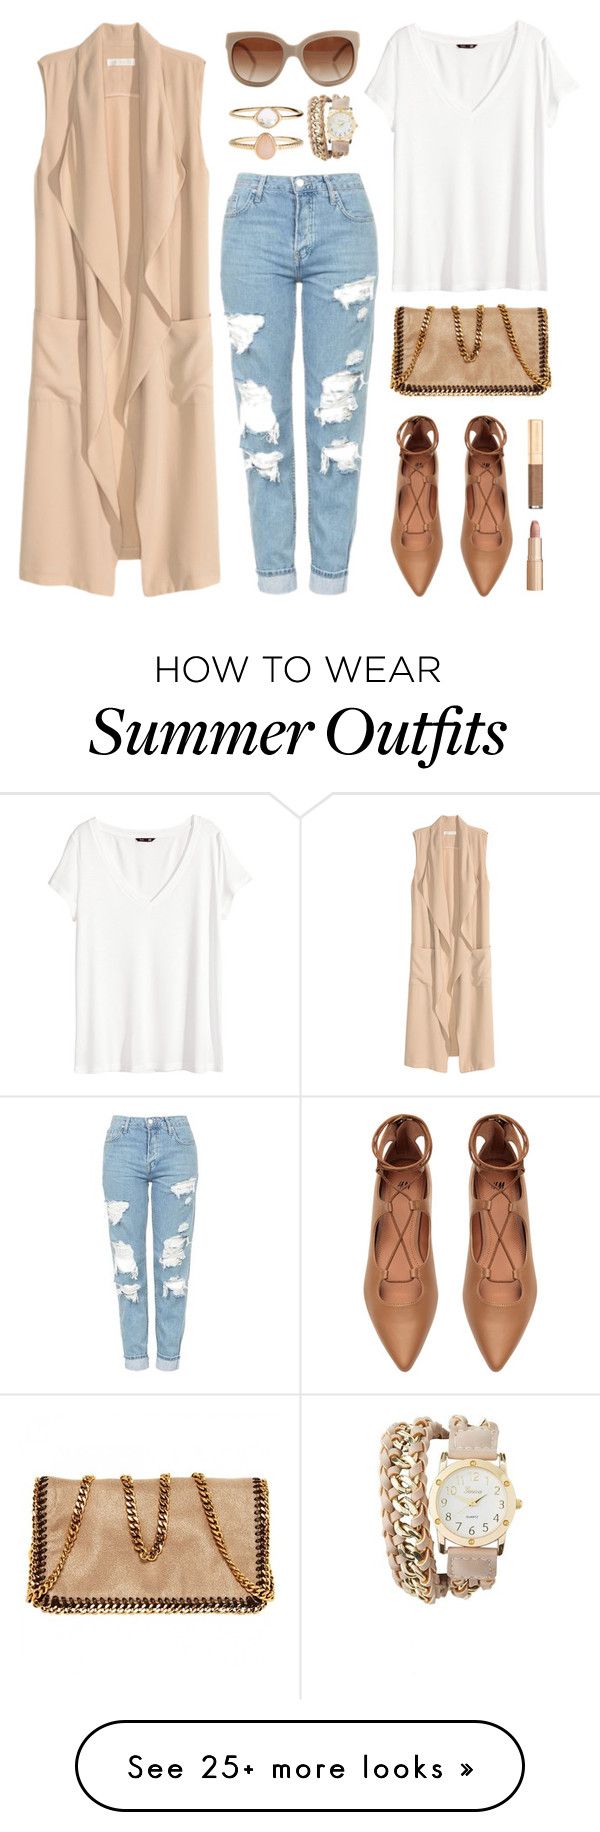 "summer to fall outfit inspiration" by anja-jovanovich on Polyvore fea...